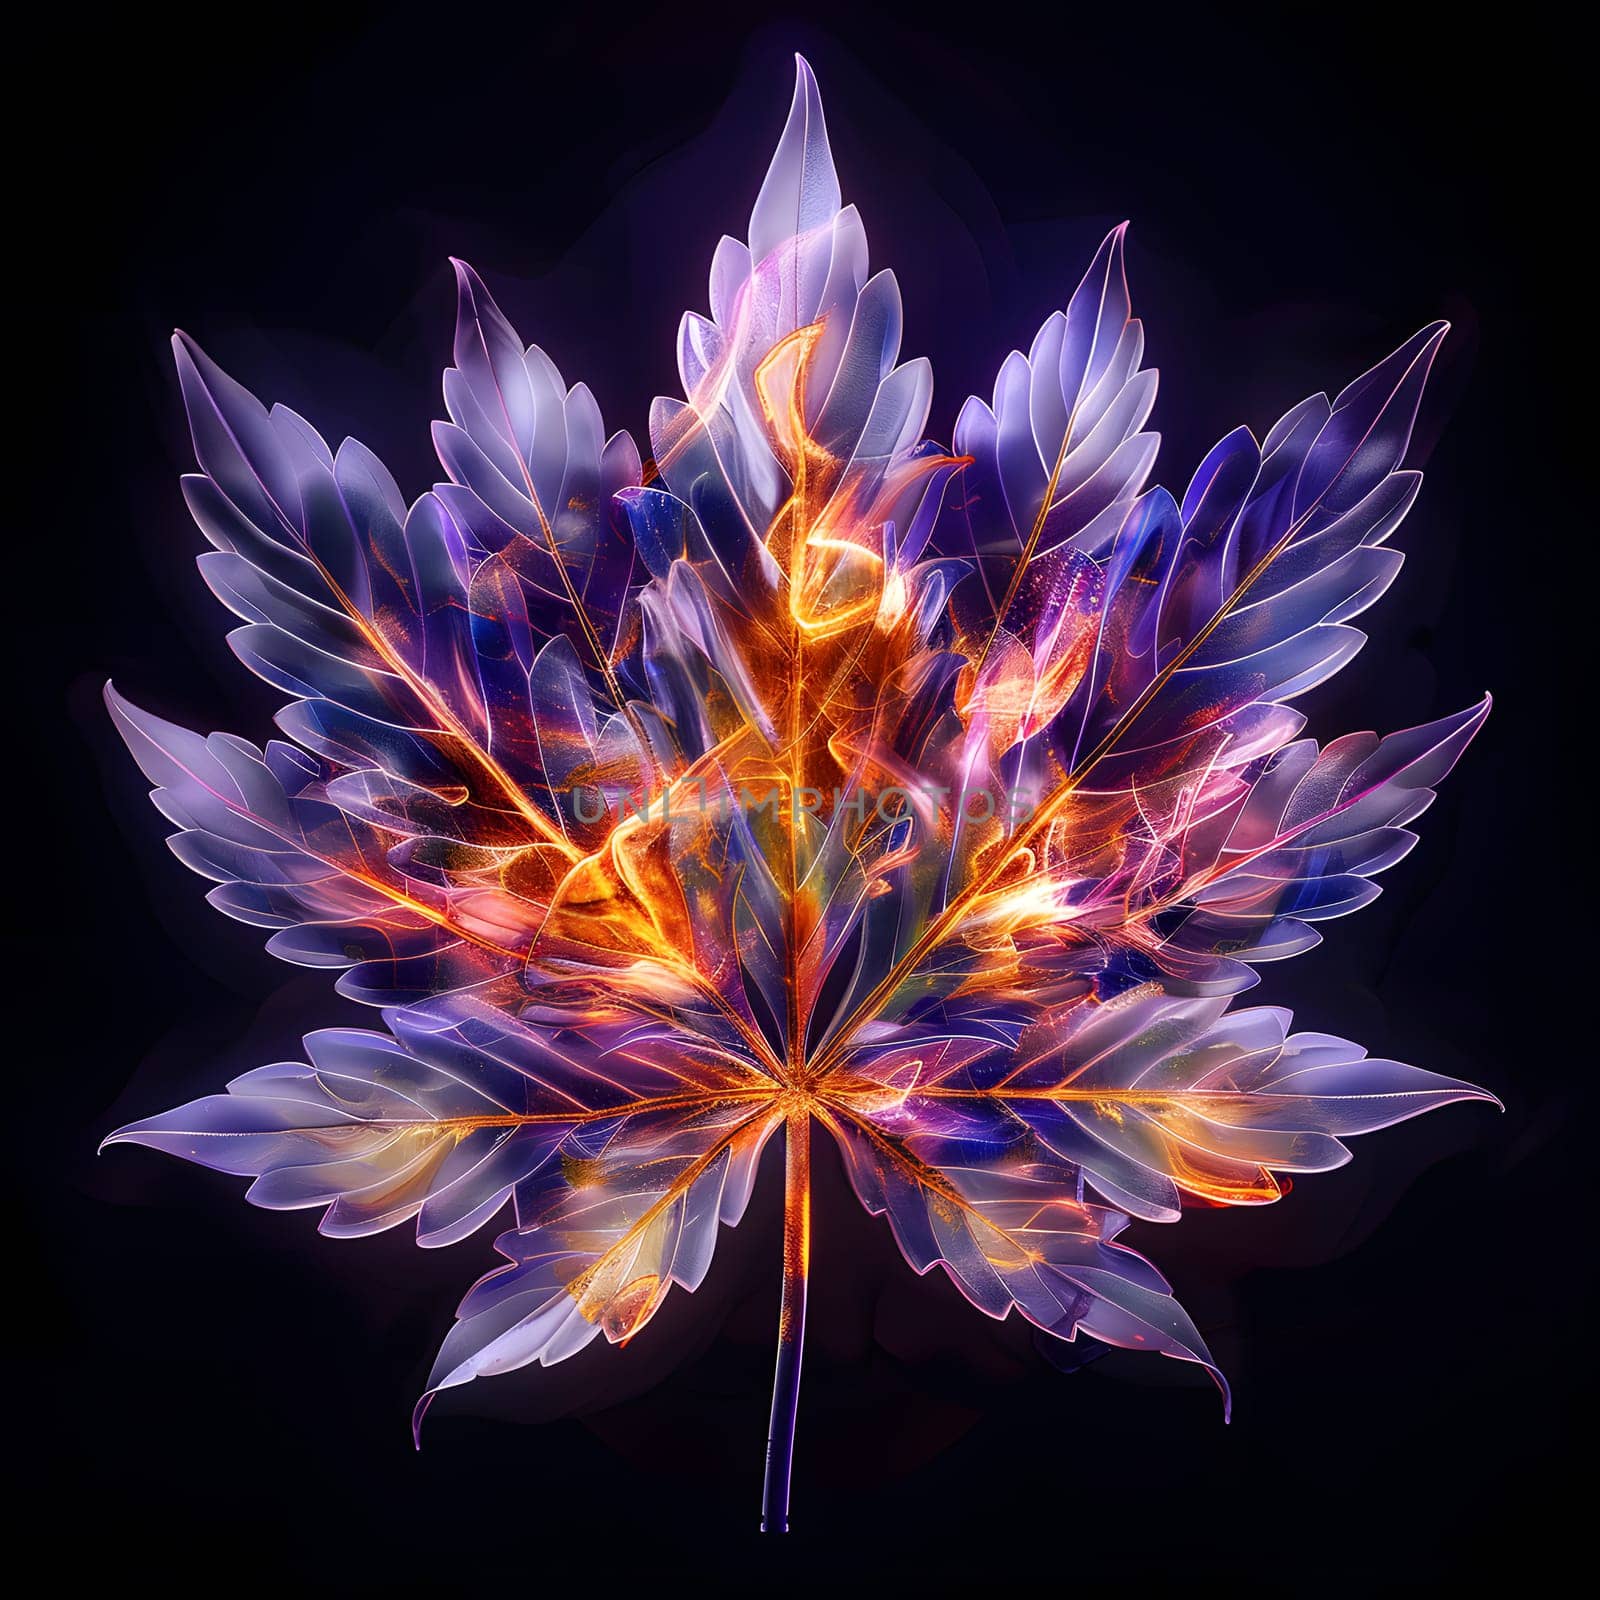 A flower with purple petals in the shape of a maple leaf engulfed in flames by Nadtochiy